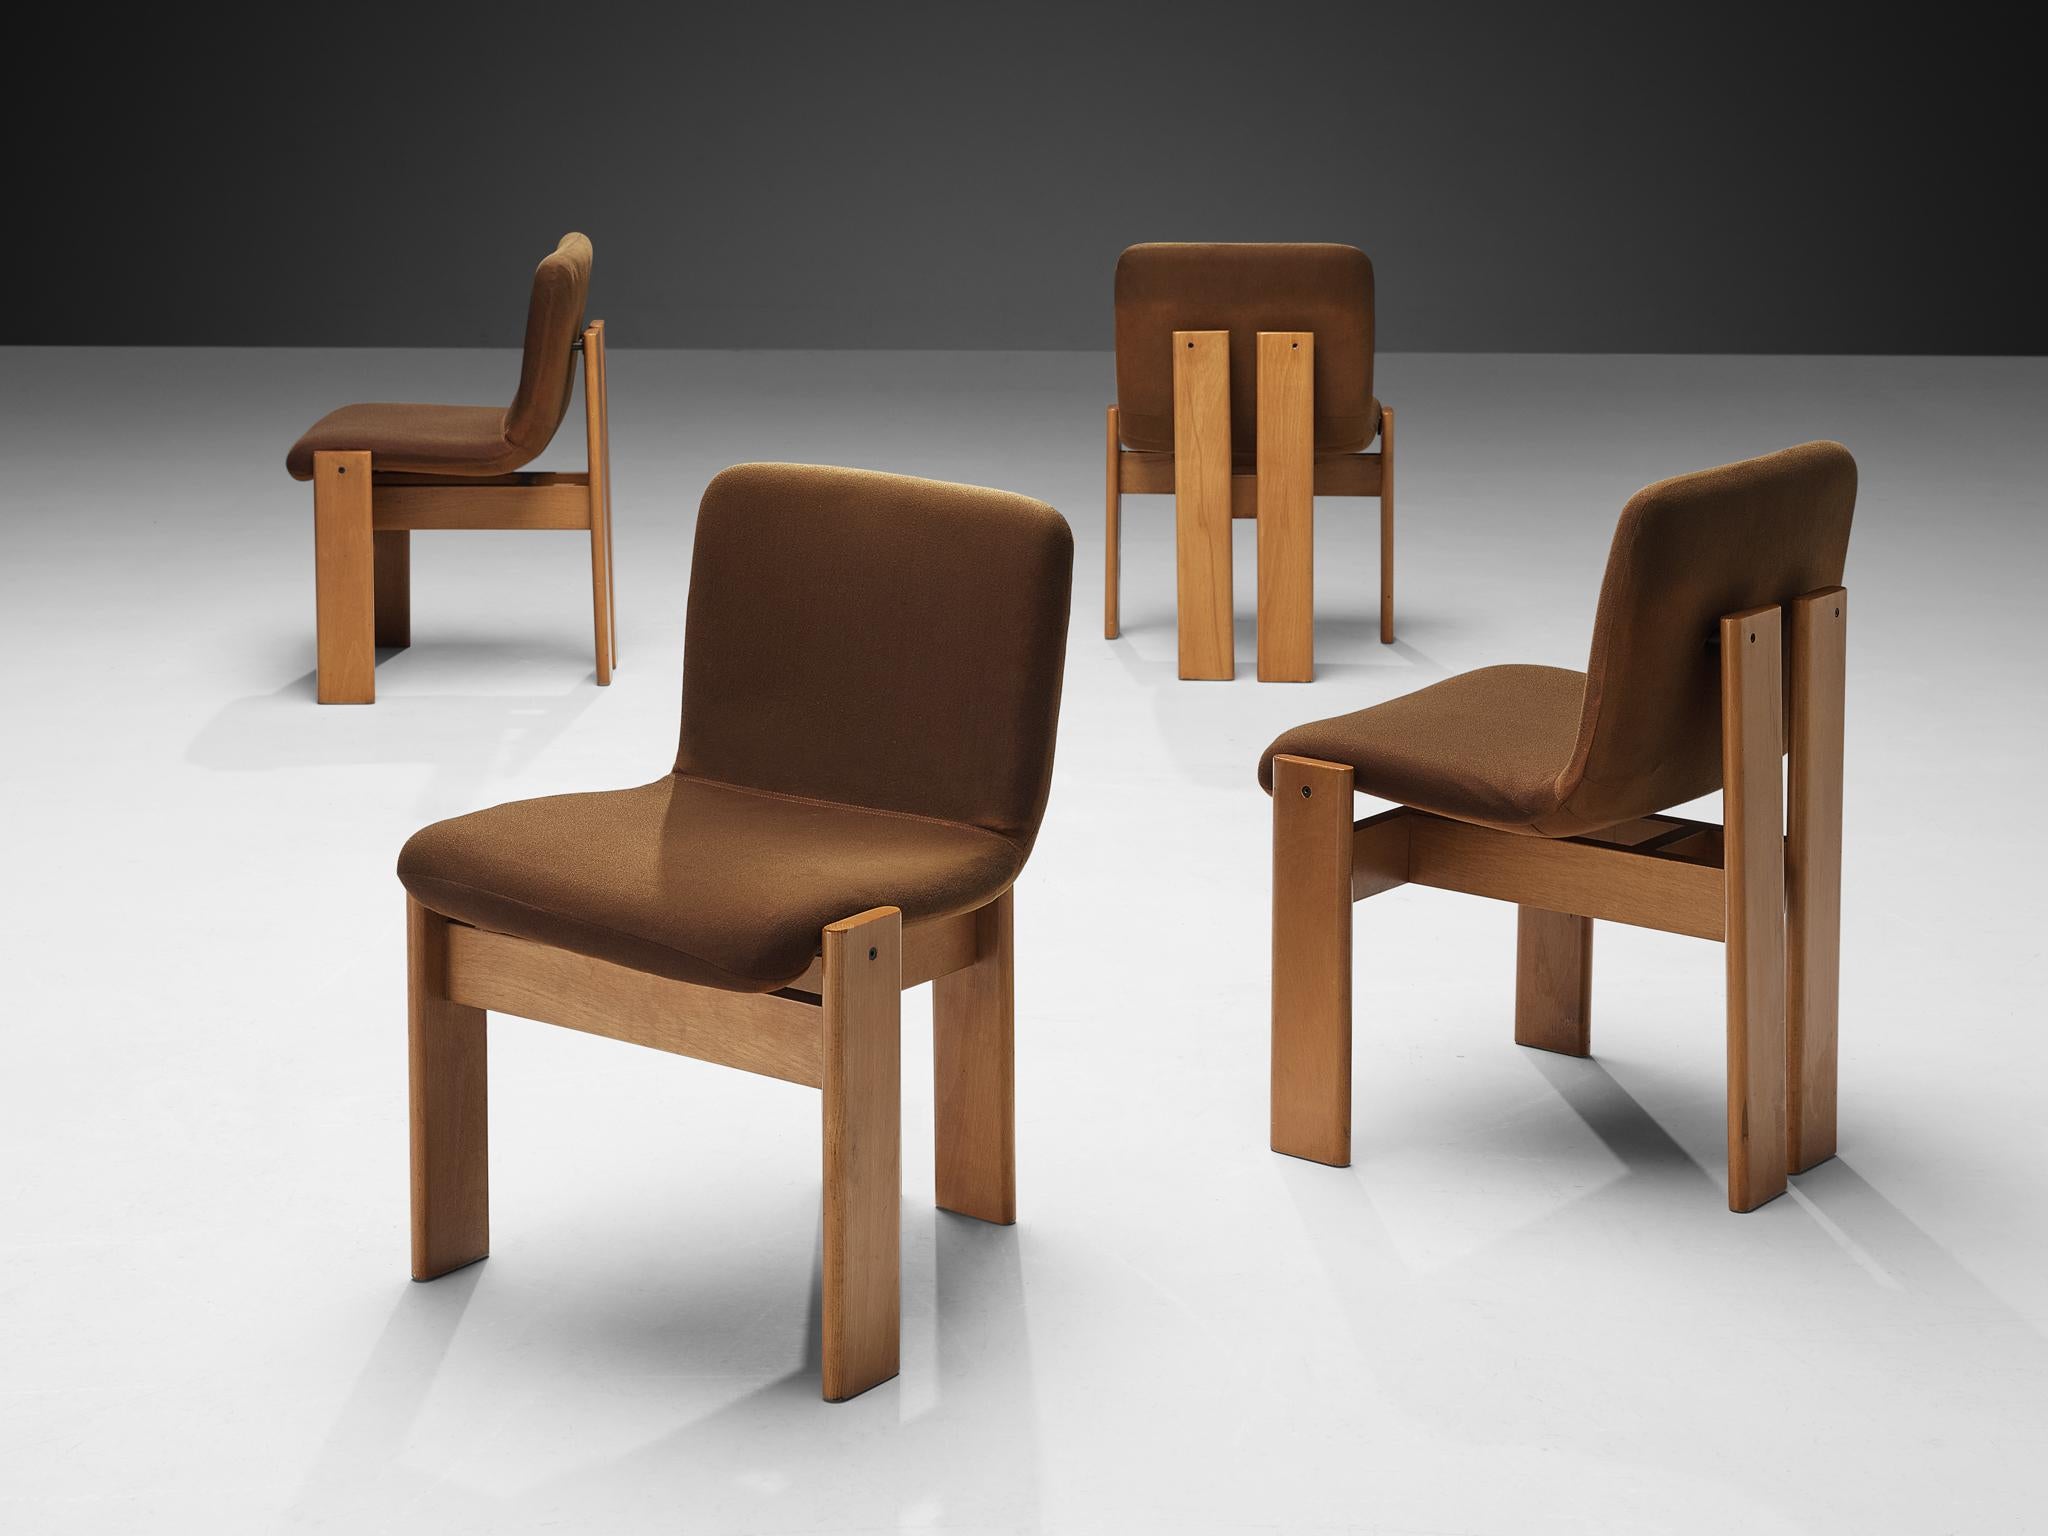 Set of four dining chairs, beech, fabric, Italy, 1960s 

These dining chairs of Italian origin have a strong resemblance to Augusto Savini’s 'Pamplona' chair (1965) and Afra & Tobia Scarpa's 'Pigreco' chair (1959-1960), yet this design is